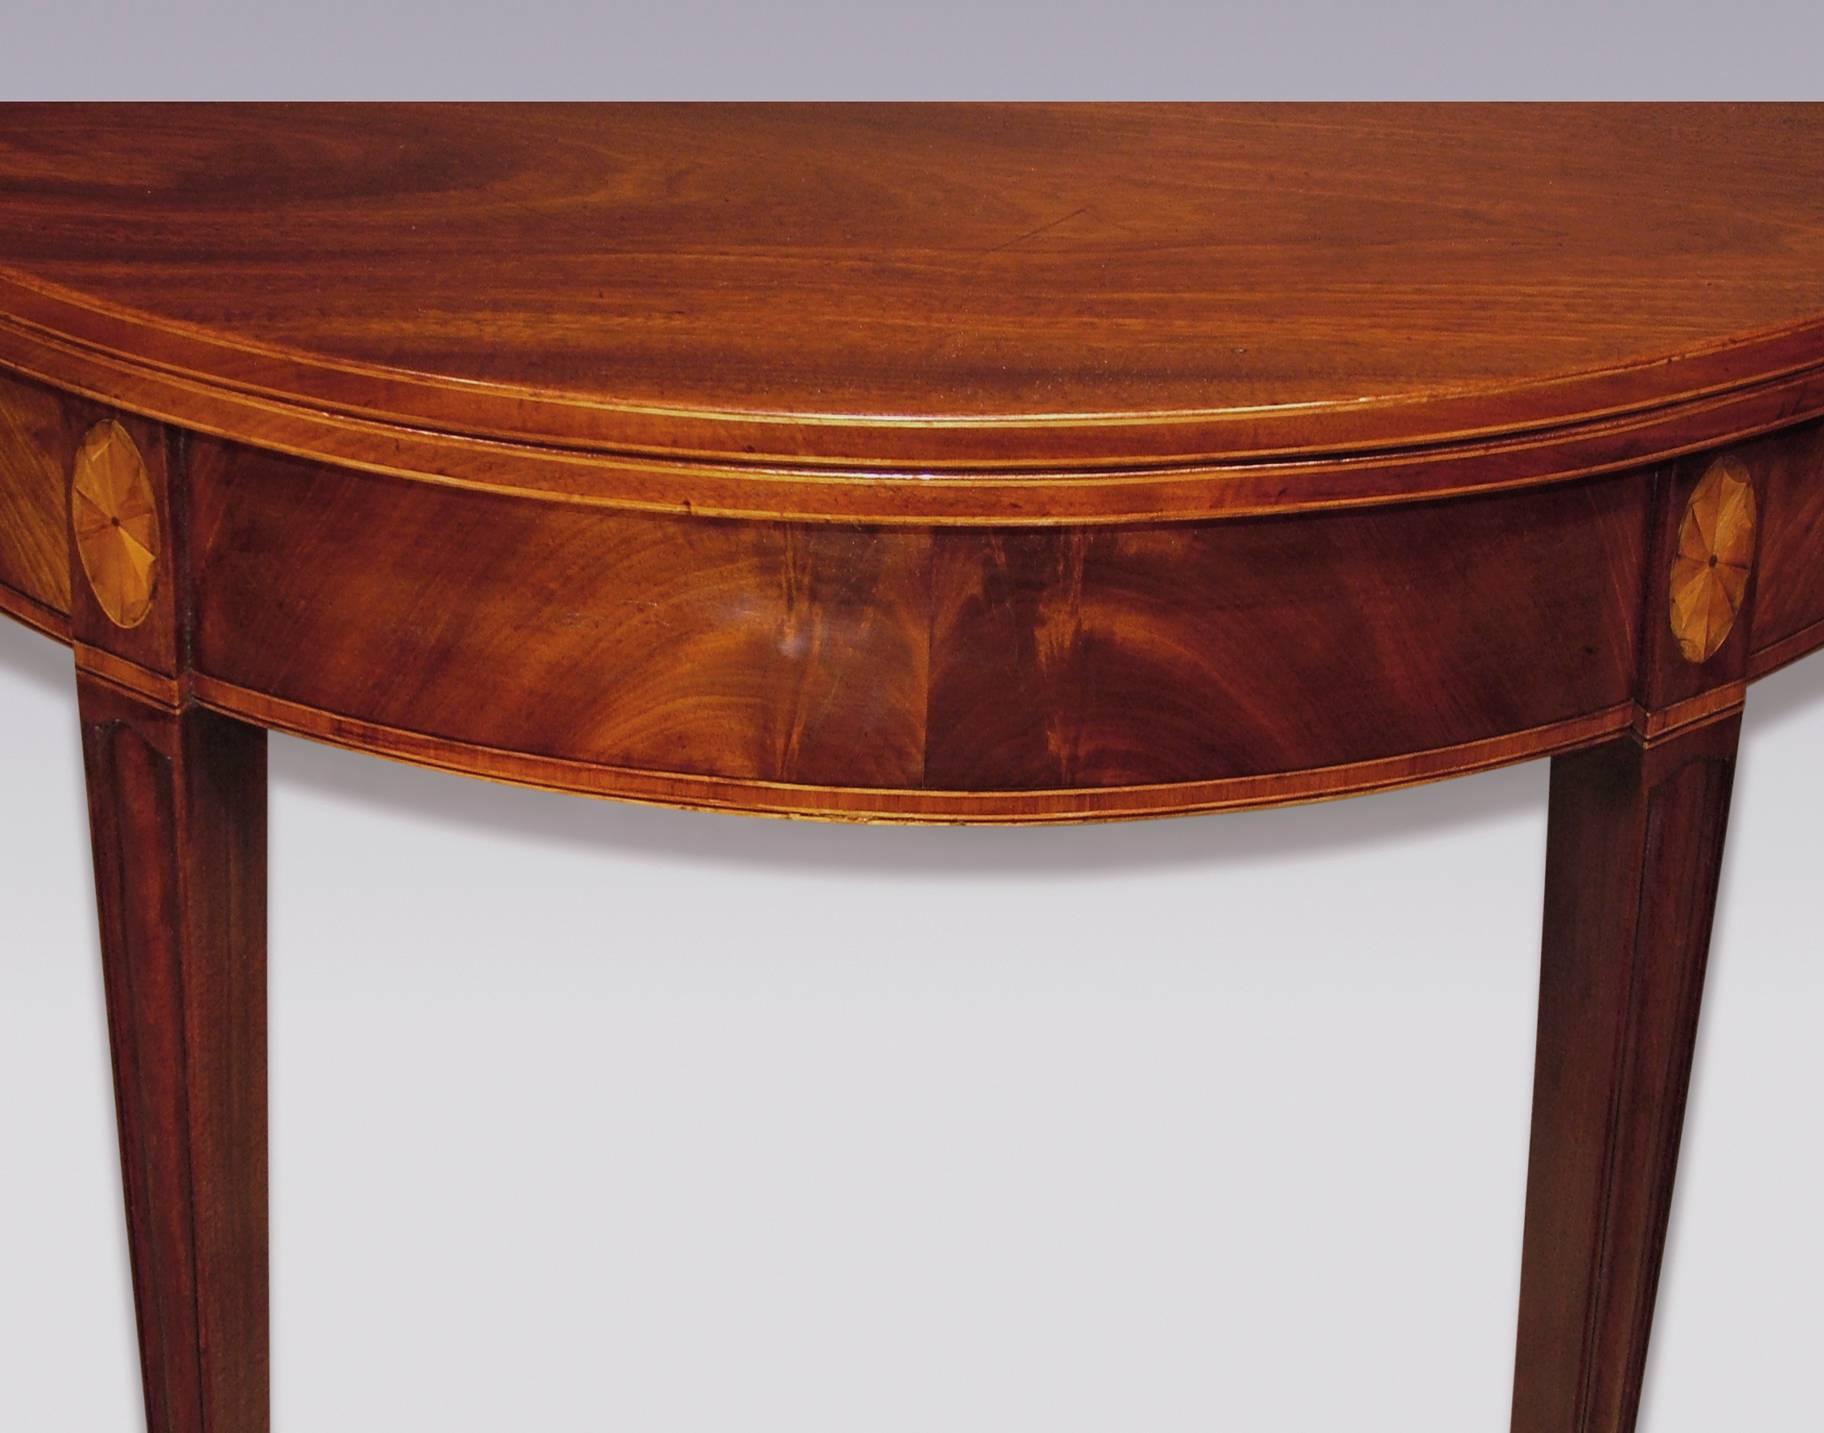 A near pair of late 18th century Sheraton period half-round figured mahogany tea tables, having boxwood strung edges above tulipwood banded friezes, supported on moulded square tapering legs with fan inlays, ending on spade toes.